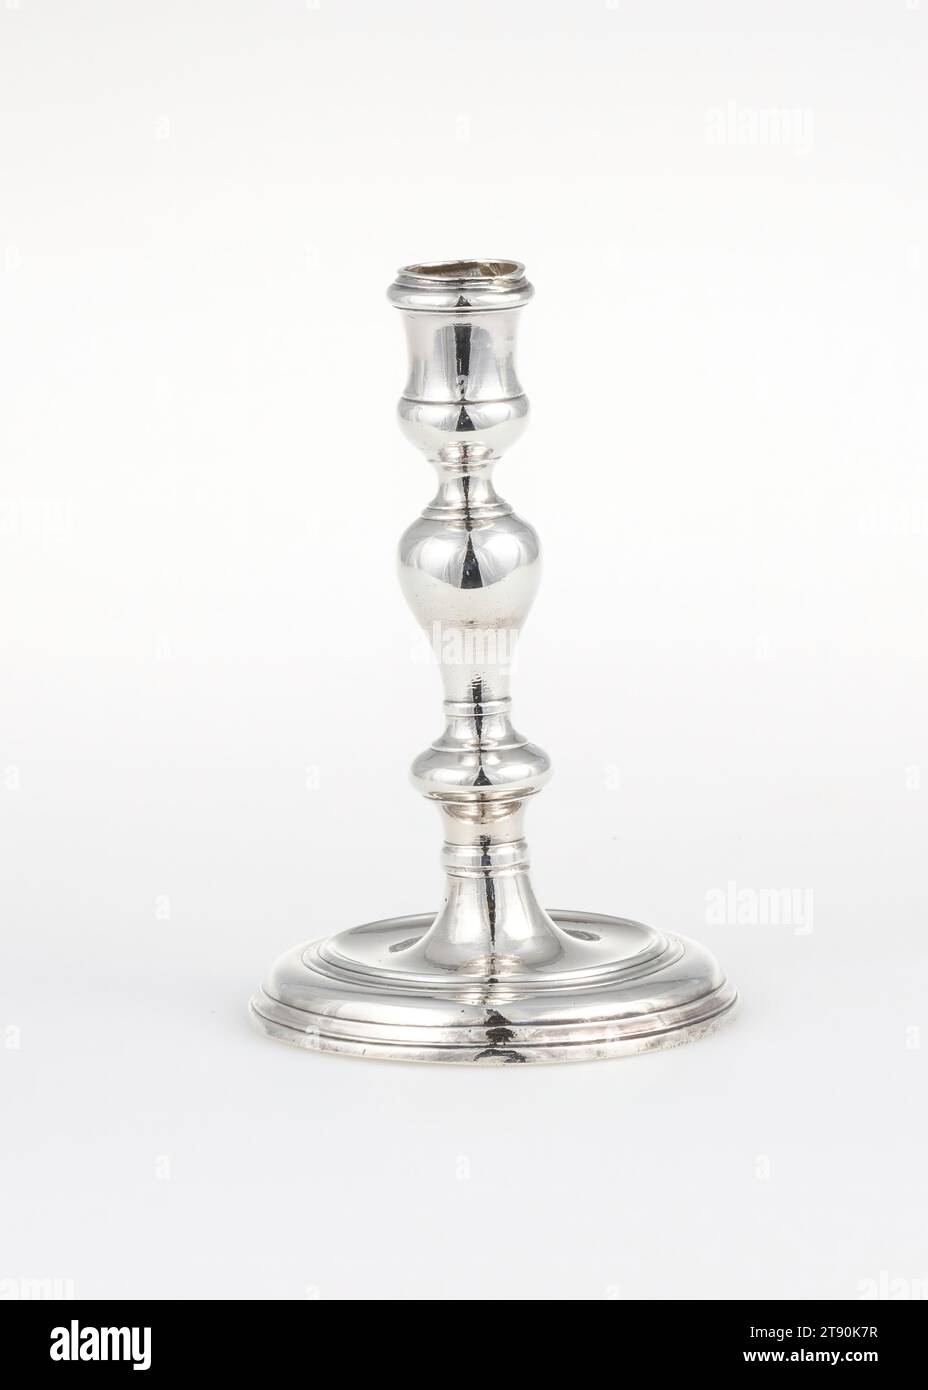 Candlestick, one of as set of four, 1722-1723, Joseph W. Bellassyse, ent. 1716, 5 7/8 in. (14.92 cm), Silver, England, 18th century Stock Photo